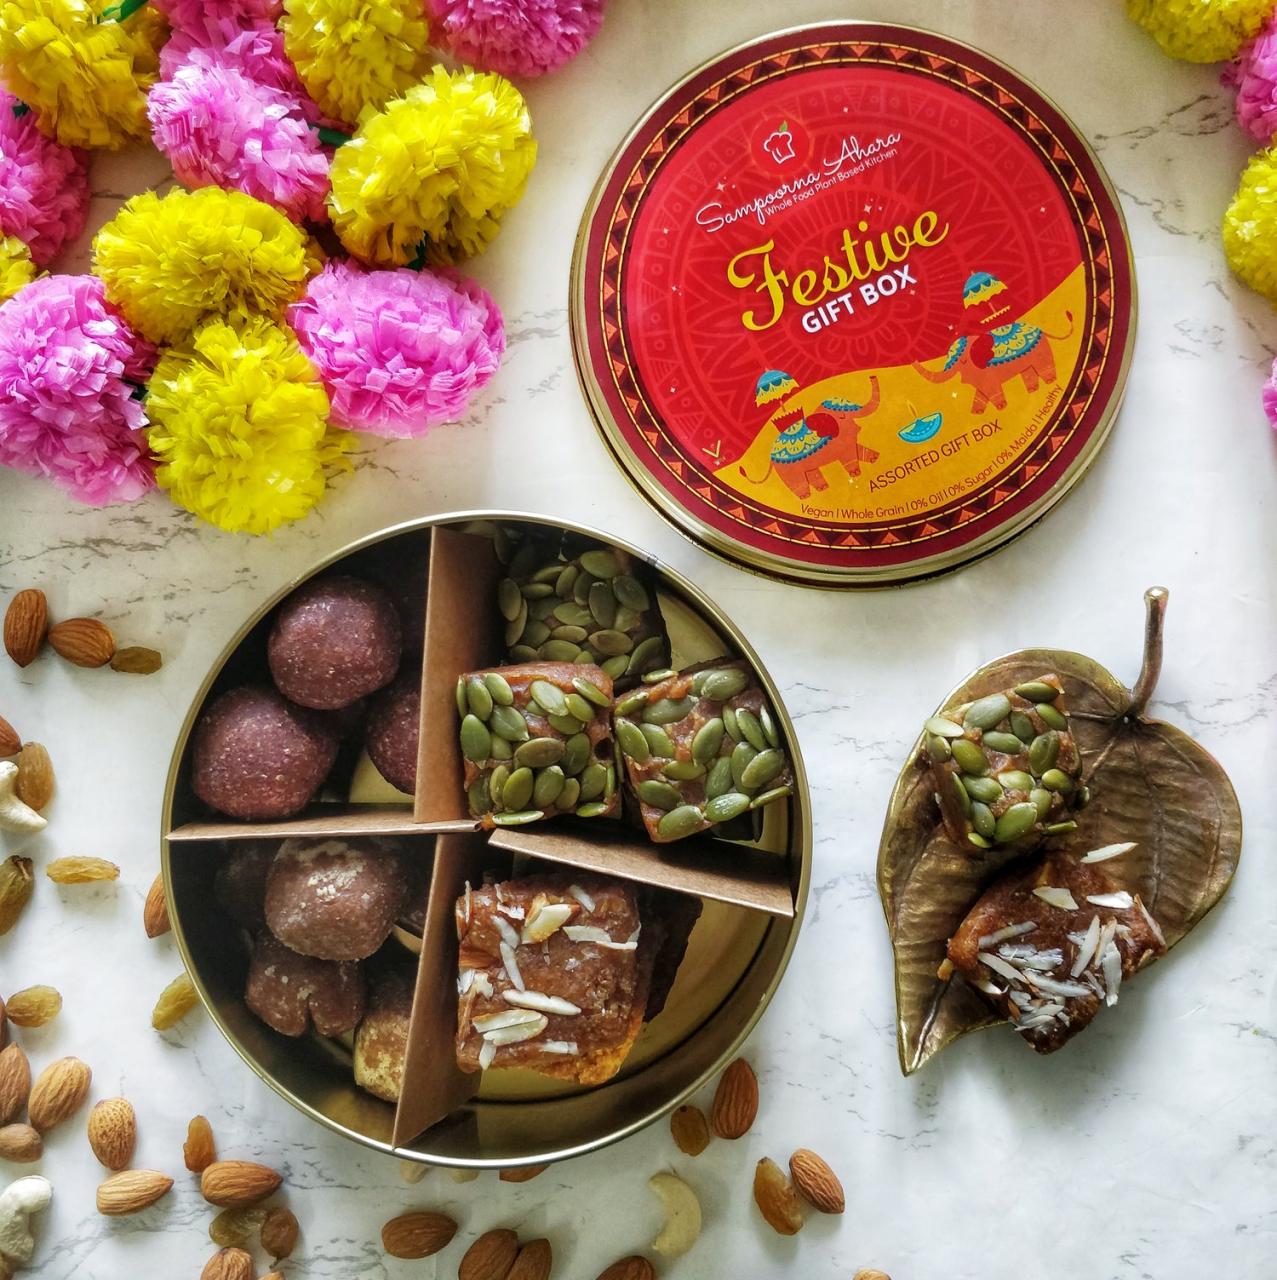 Buy Sampoorna Ahara Sweets Gift Box at Lowest Price in India for Home  Delivery - Assorted Sweets - Flavours of South India - 500g, 4 Varieties,  4-5 Pieces Each | Oil-free, Date